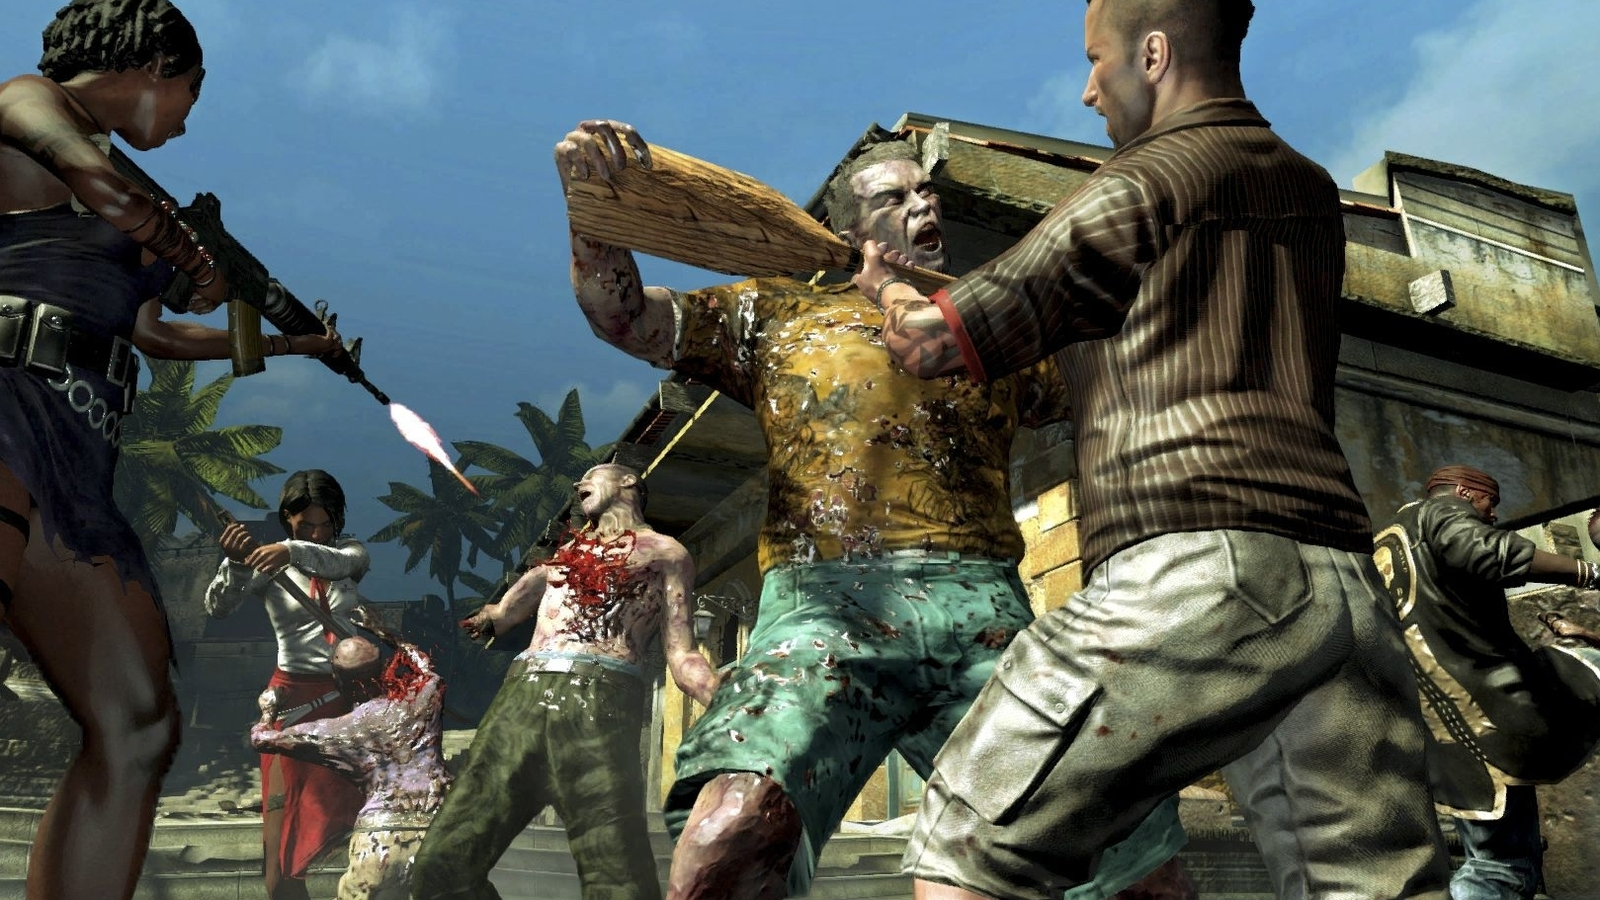 Dead Island Riptide shows off first gameplay